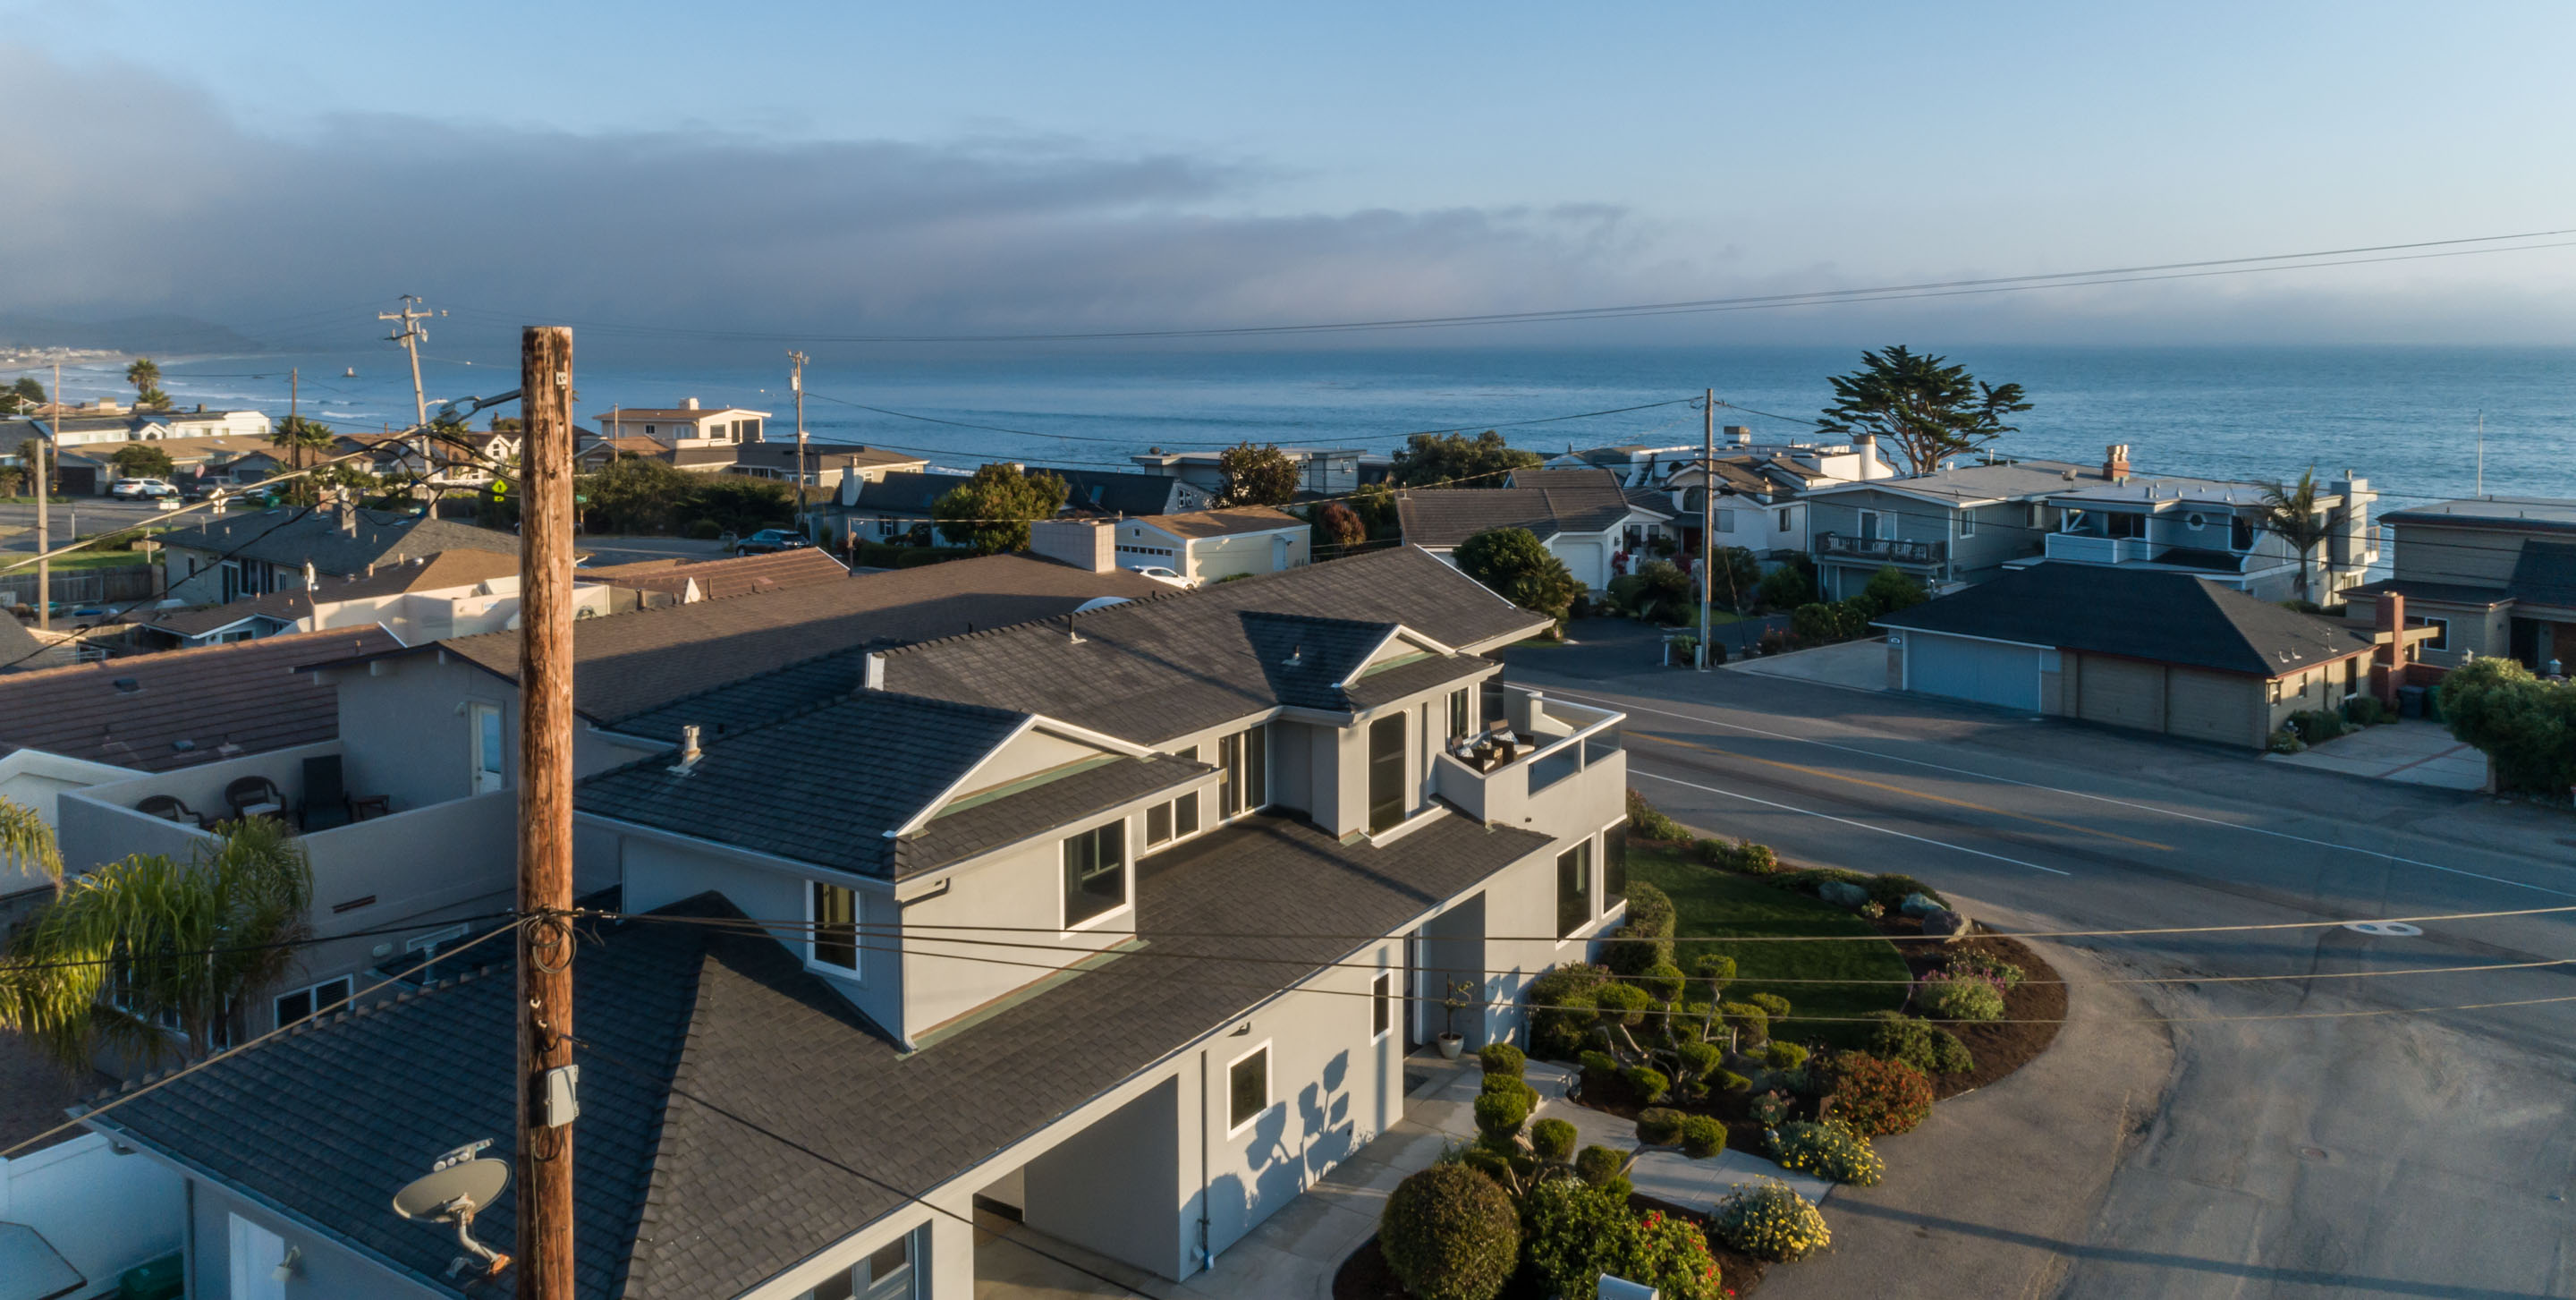 Coastal View Home For Sale Walk to Ocean Pacific Ave Cayucos Ca 93430